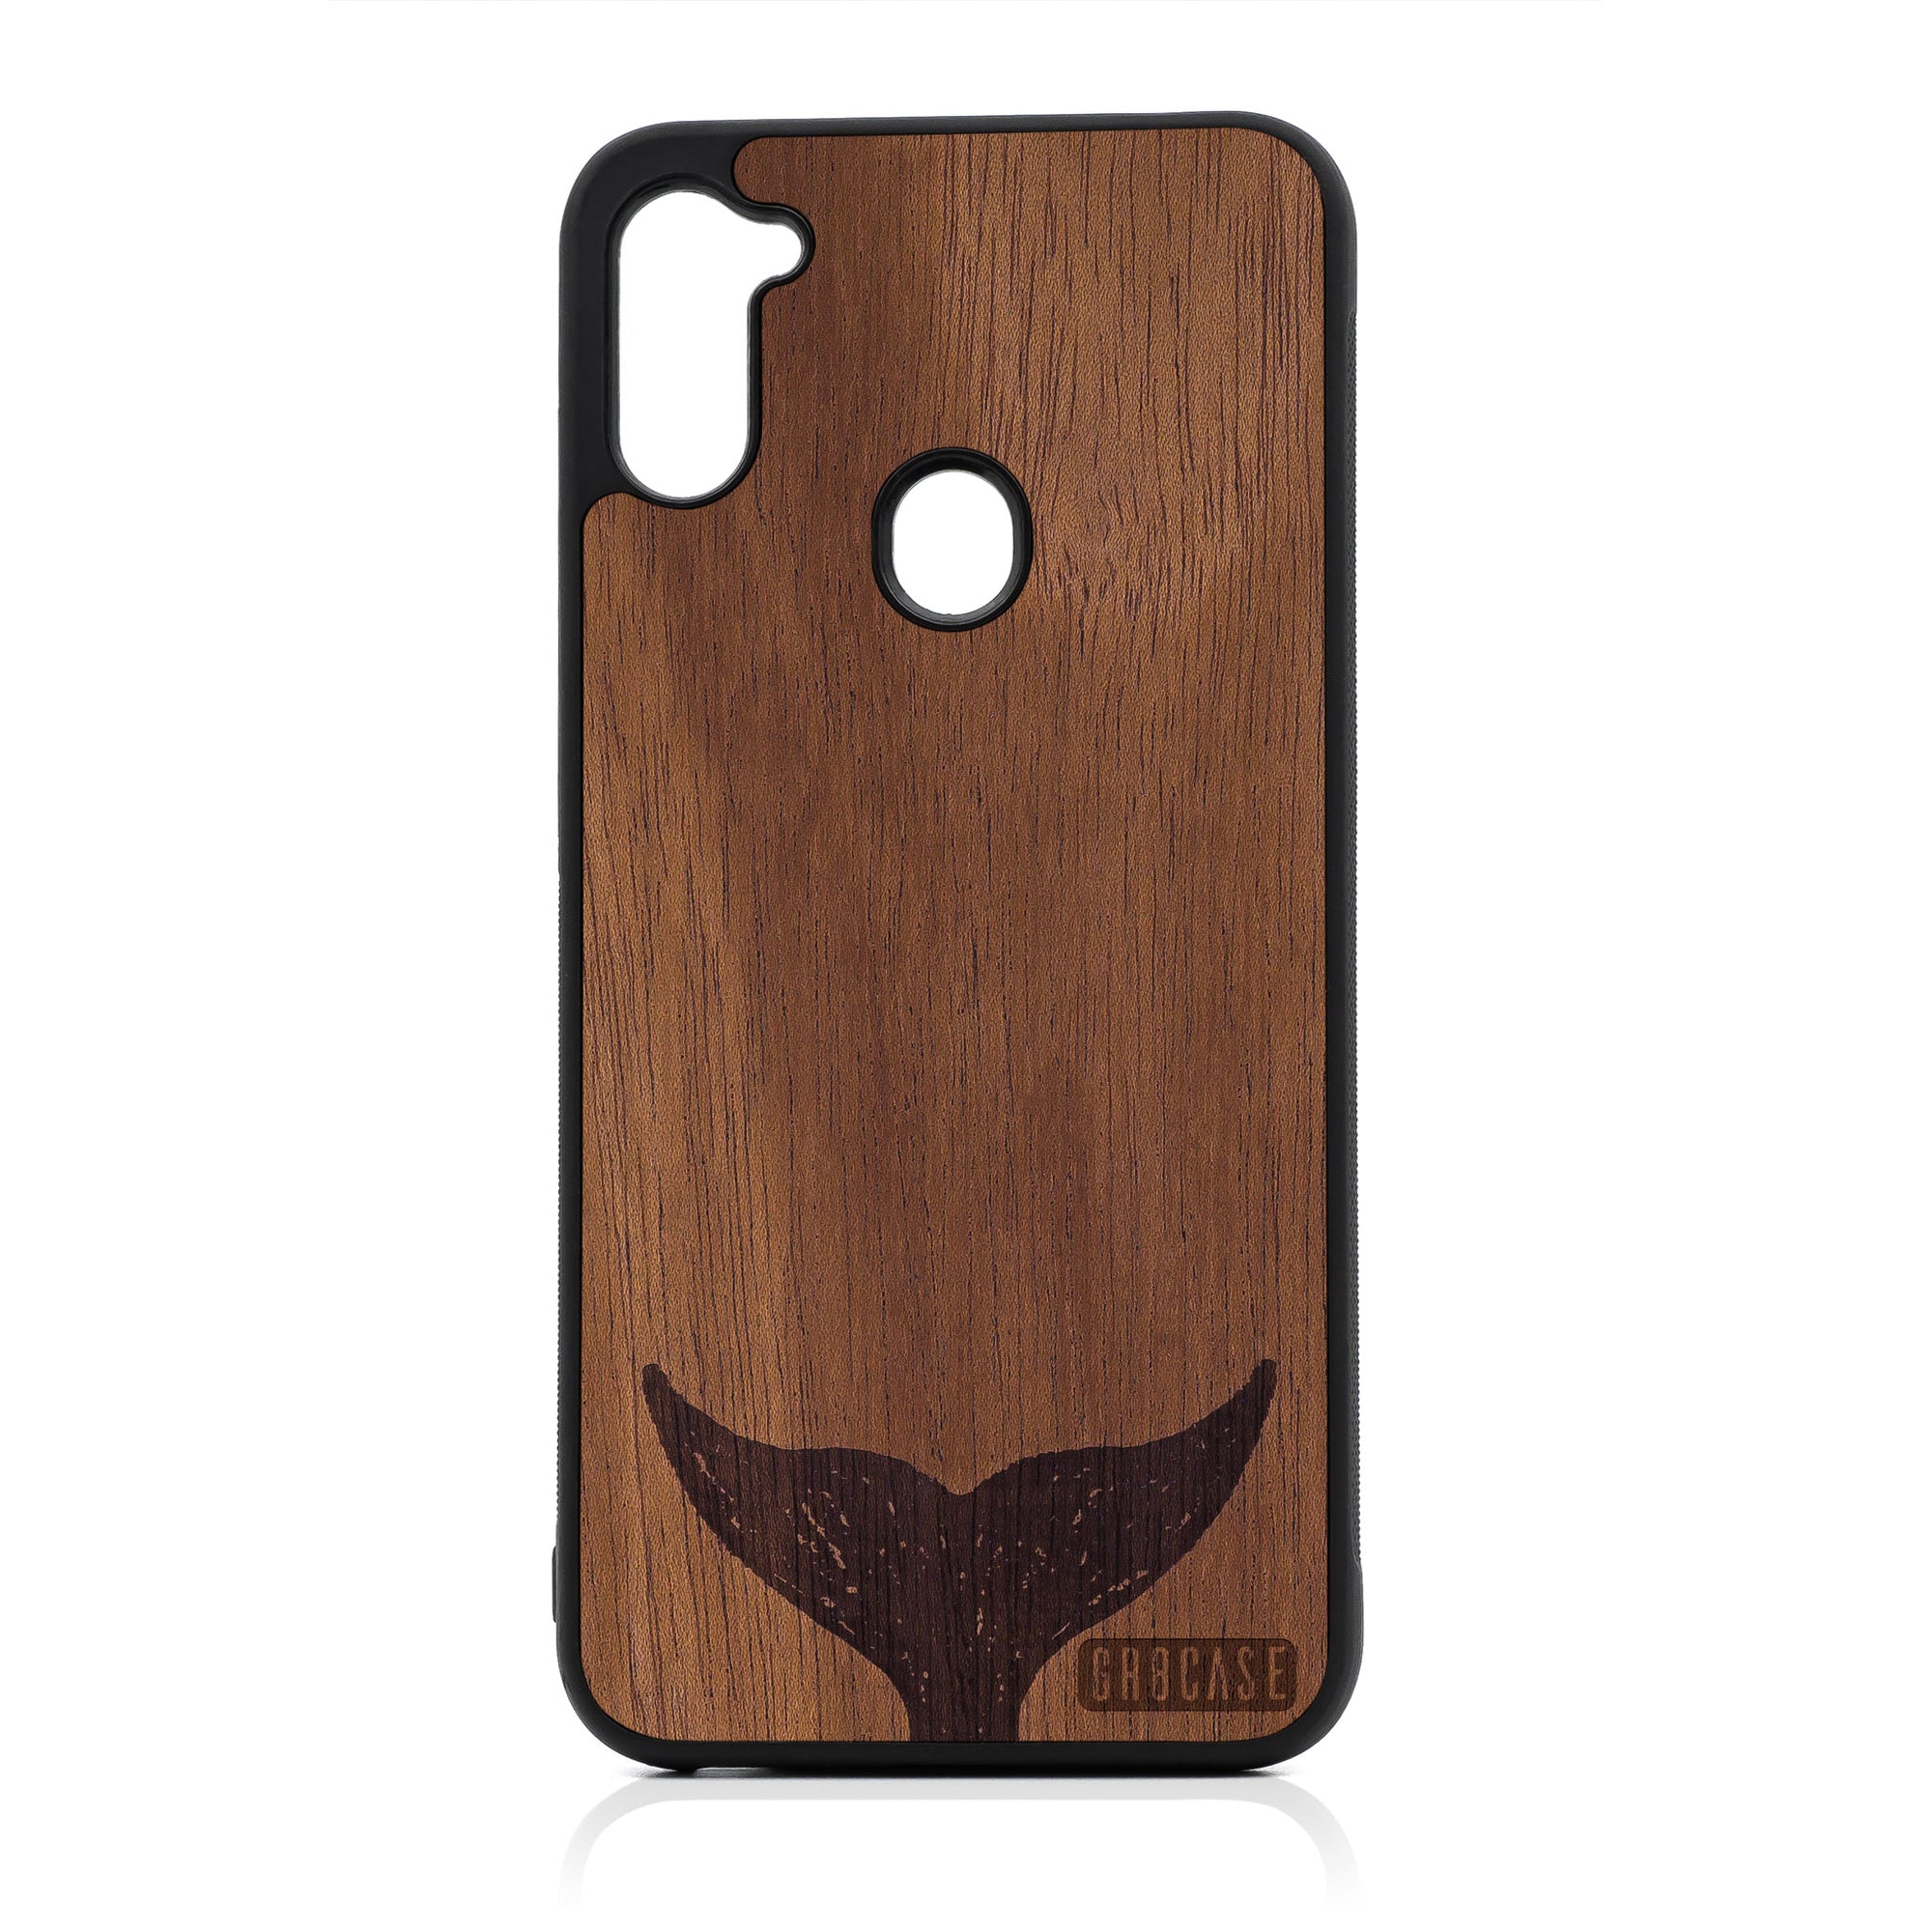 Whale Tail Design Wood Case For Samsung Galaxy A11